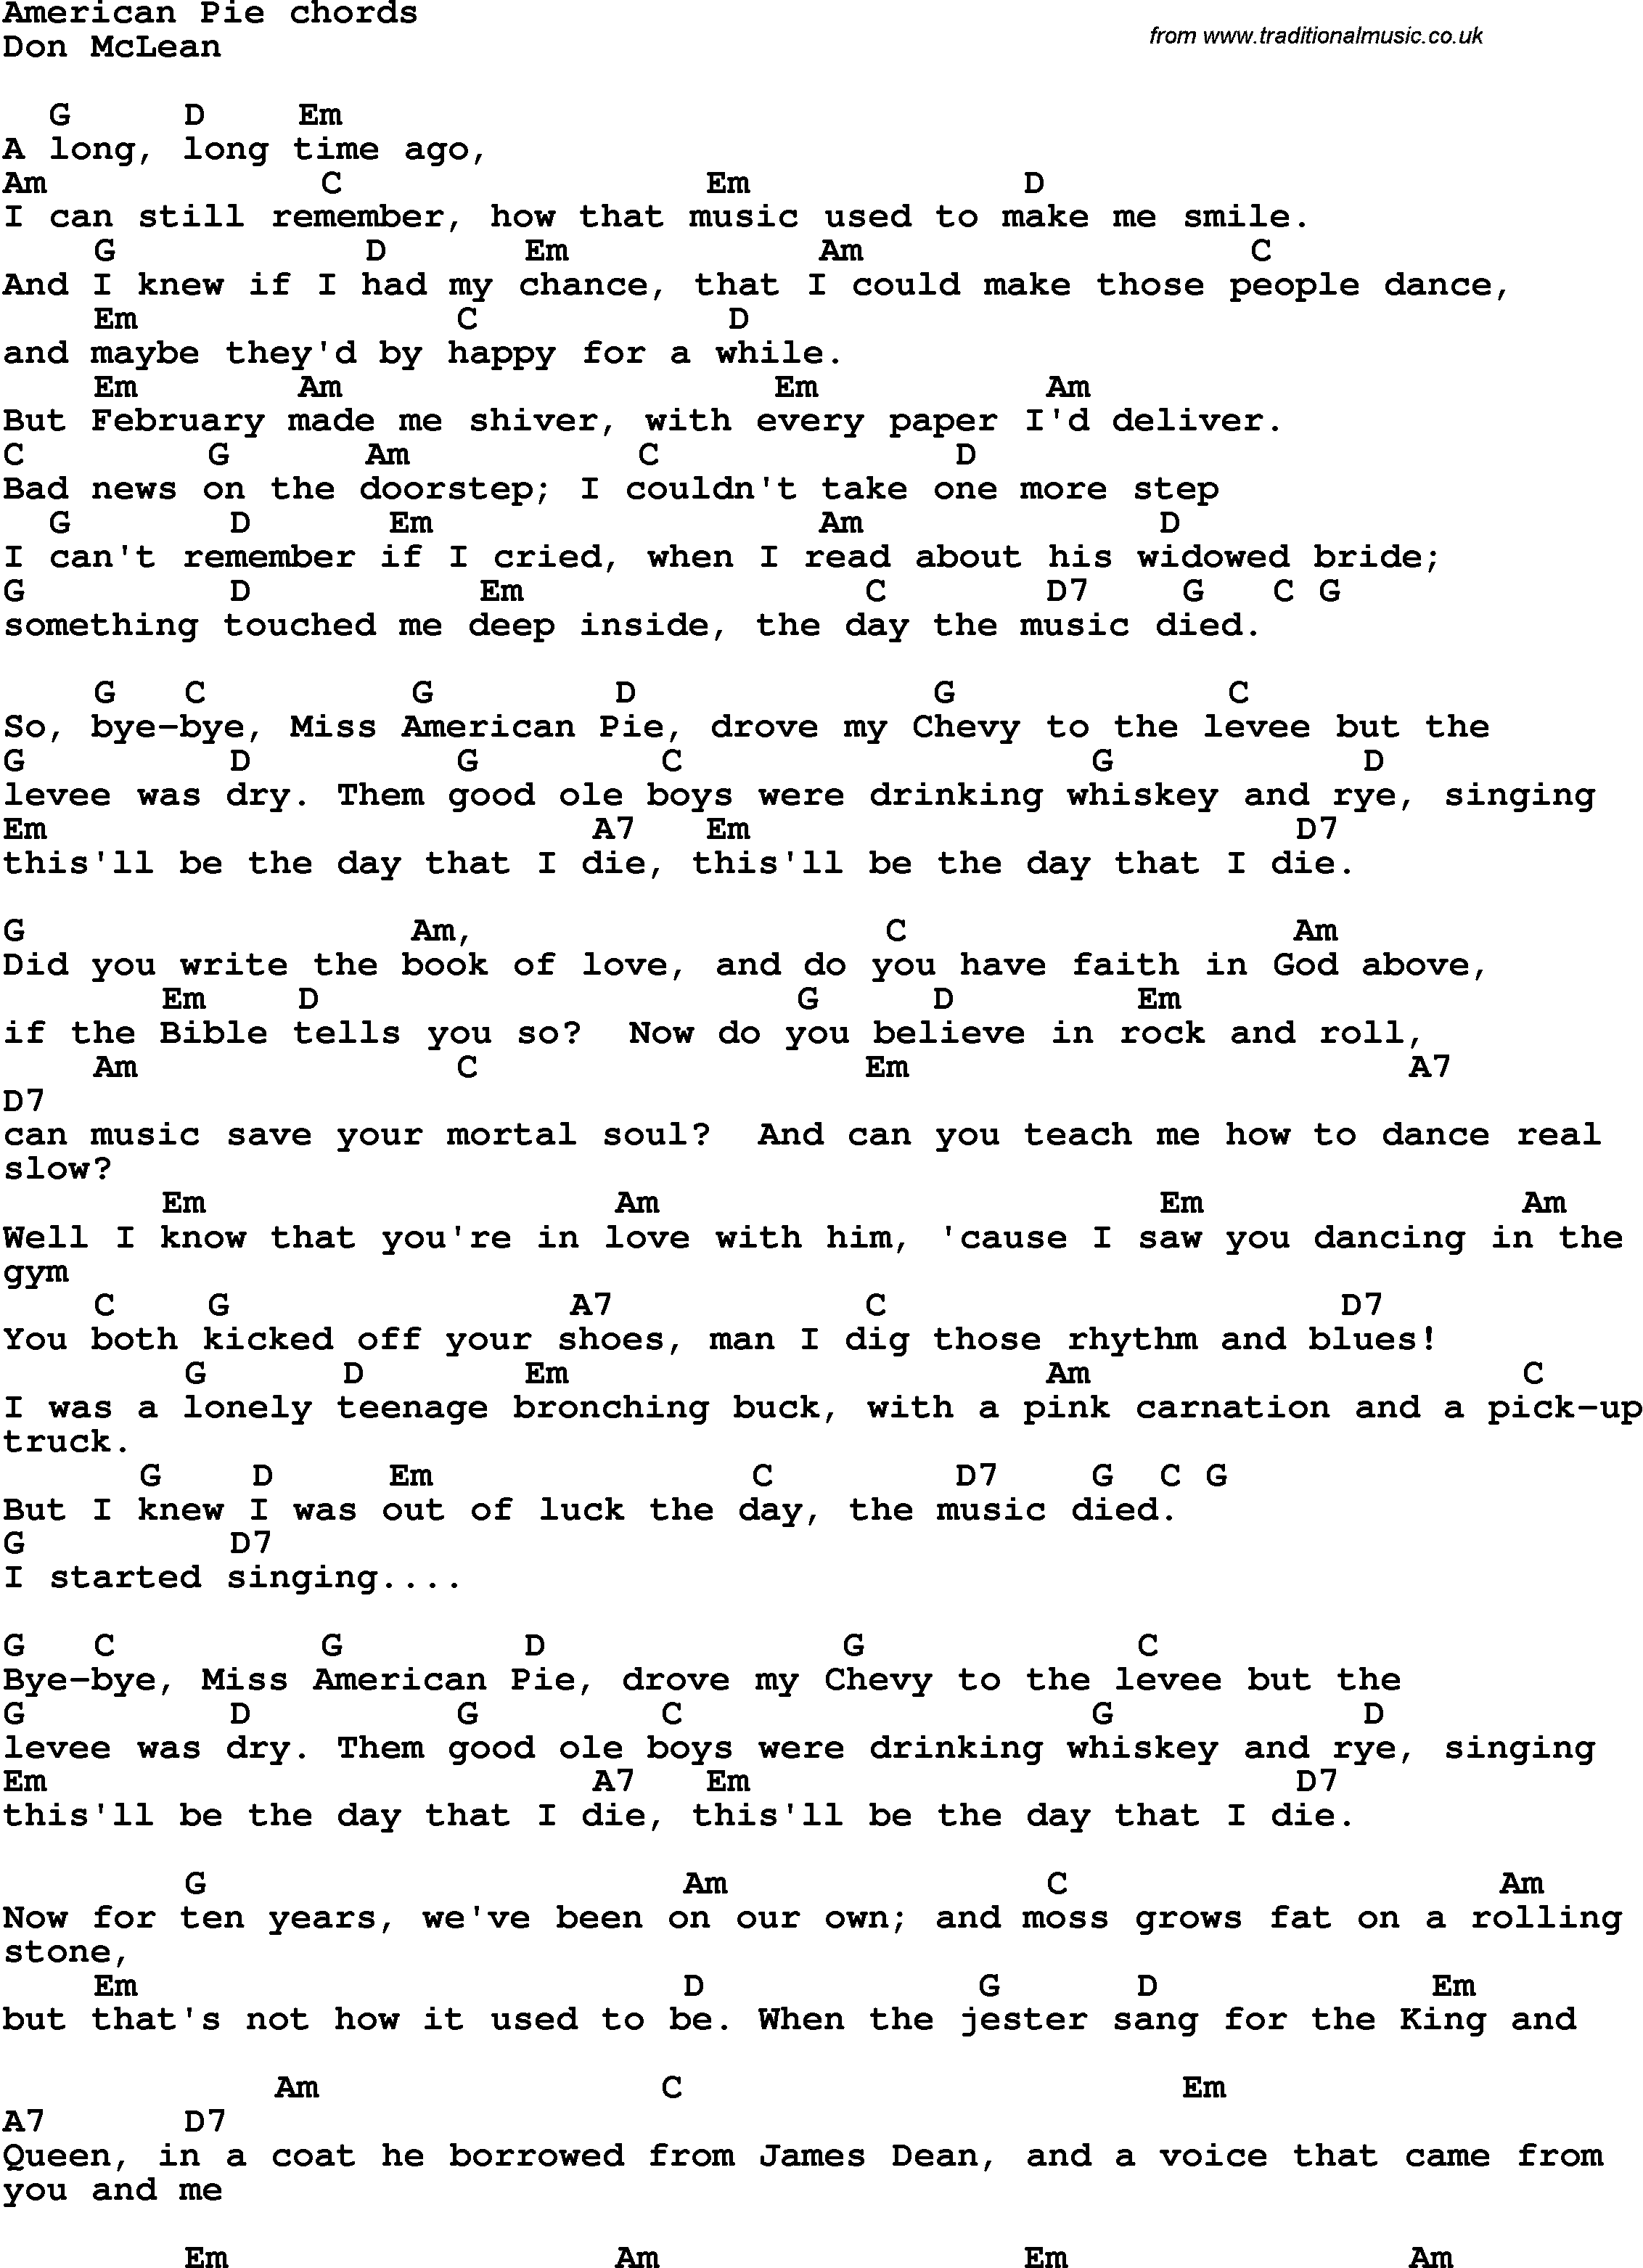 Song Lyrics with guitar chords for American Pie